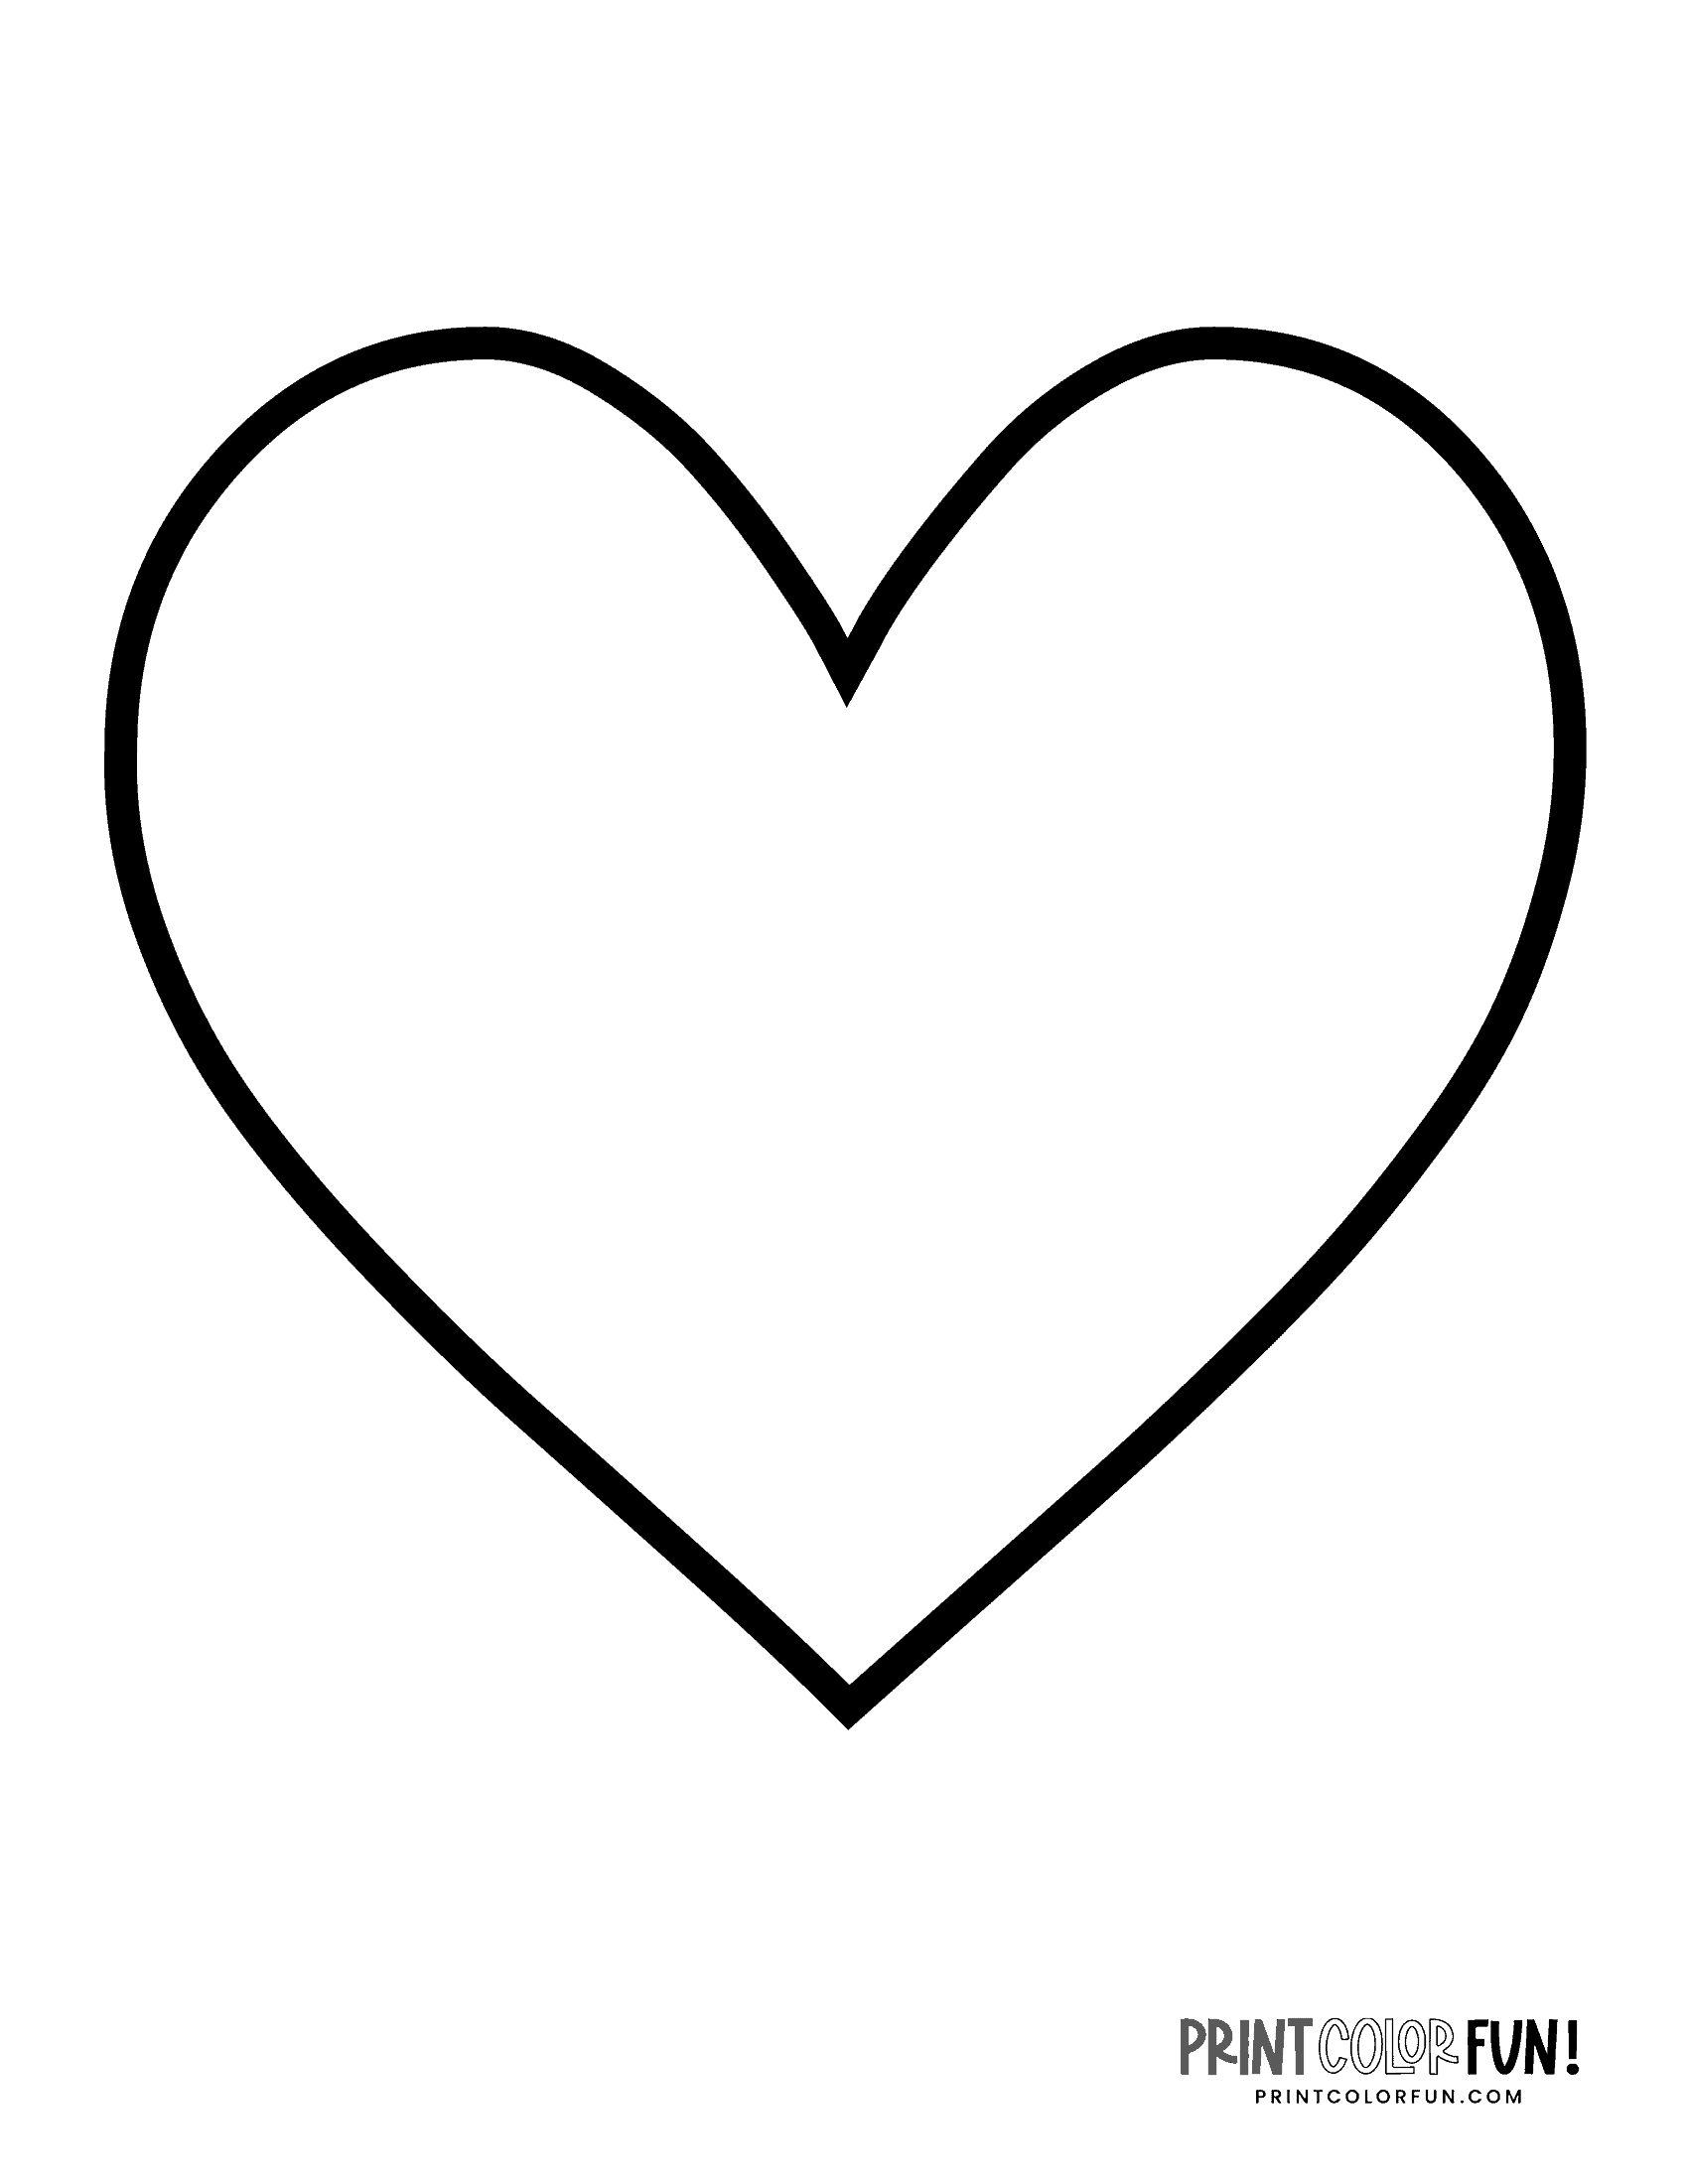 Blank heart shape coloring pages & crafty printables Print Color Fun!